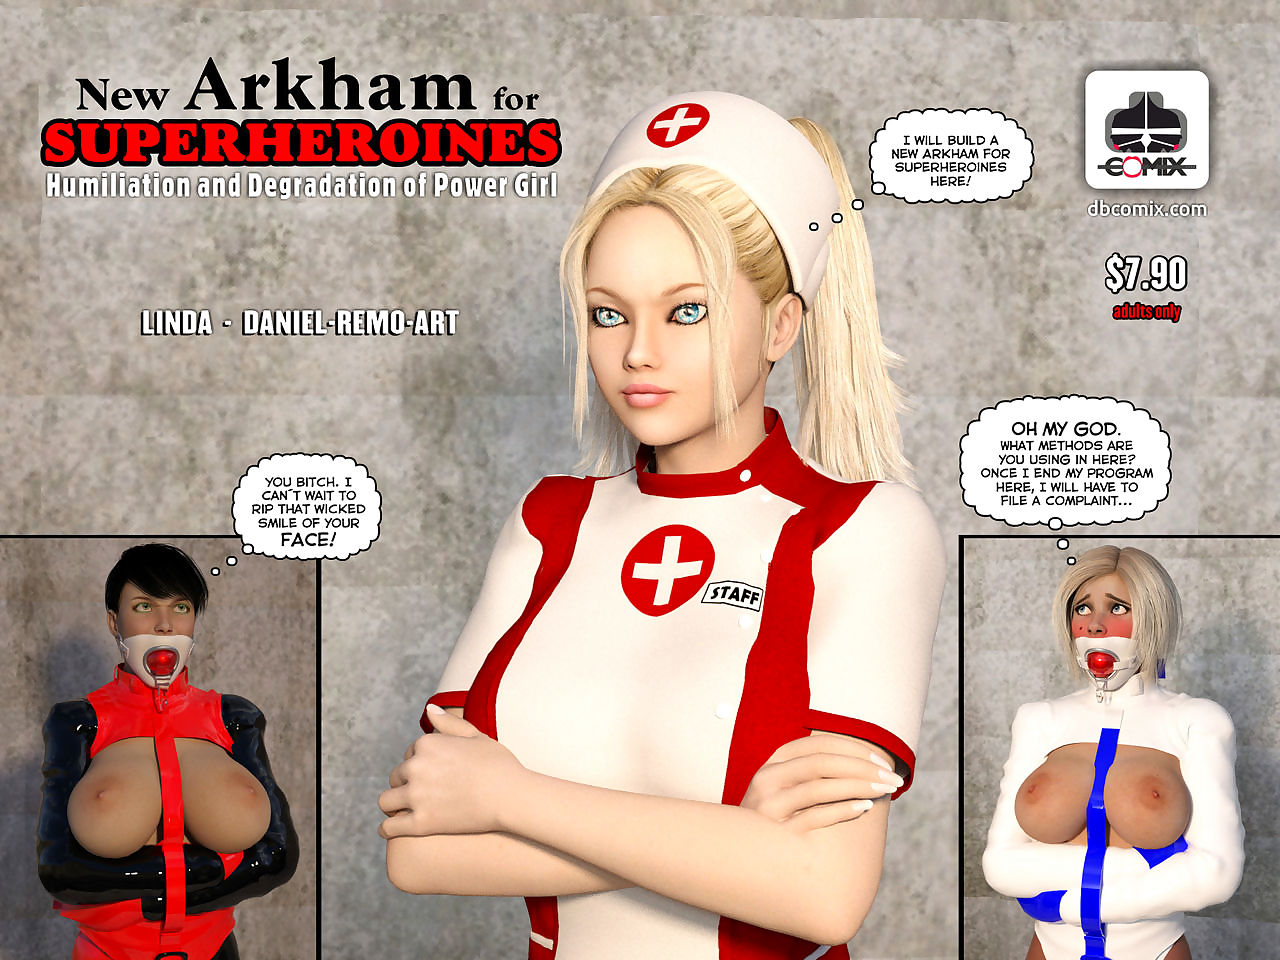 New Arkham For Superheroines 1 - Humiliation and Degradation of Power Girl